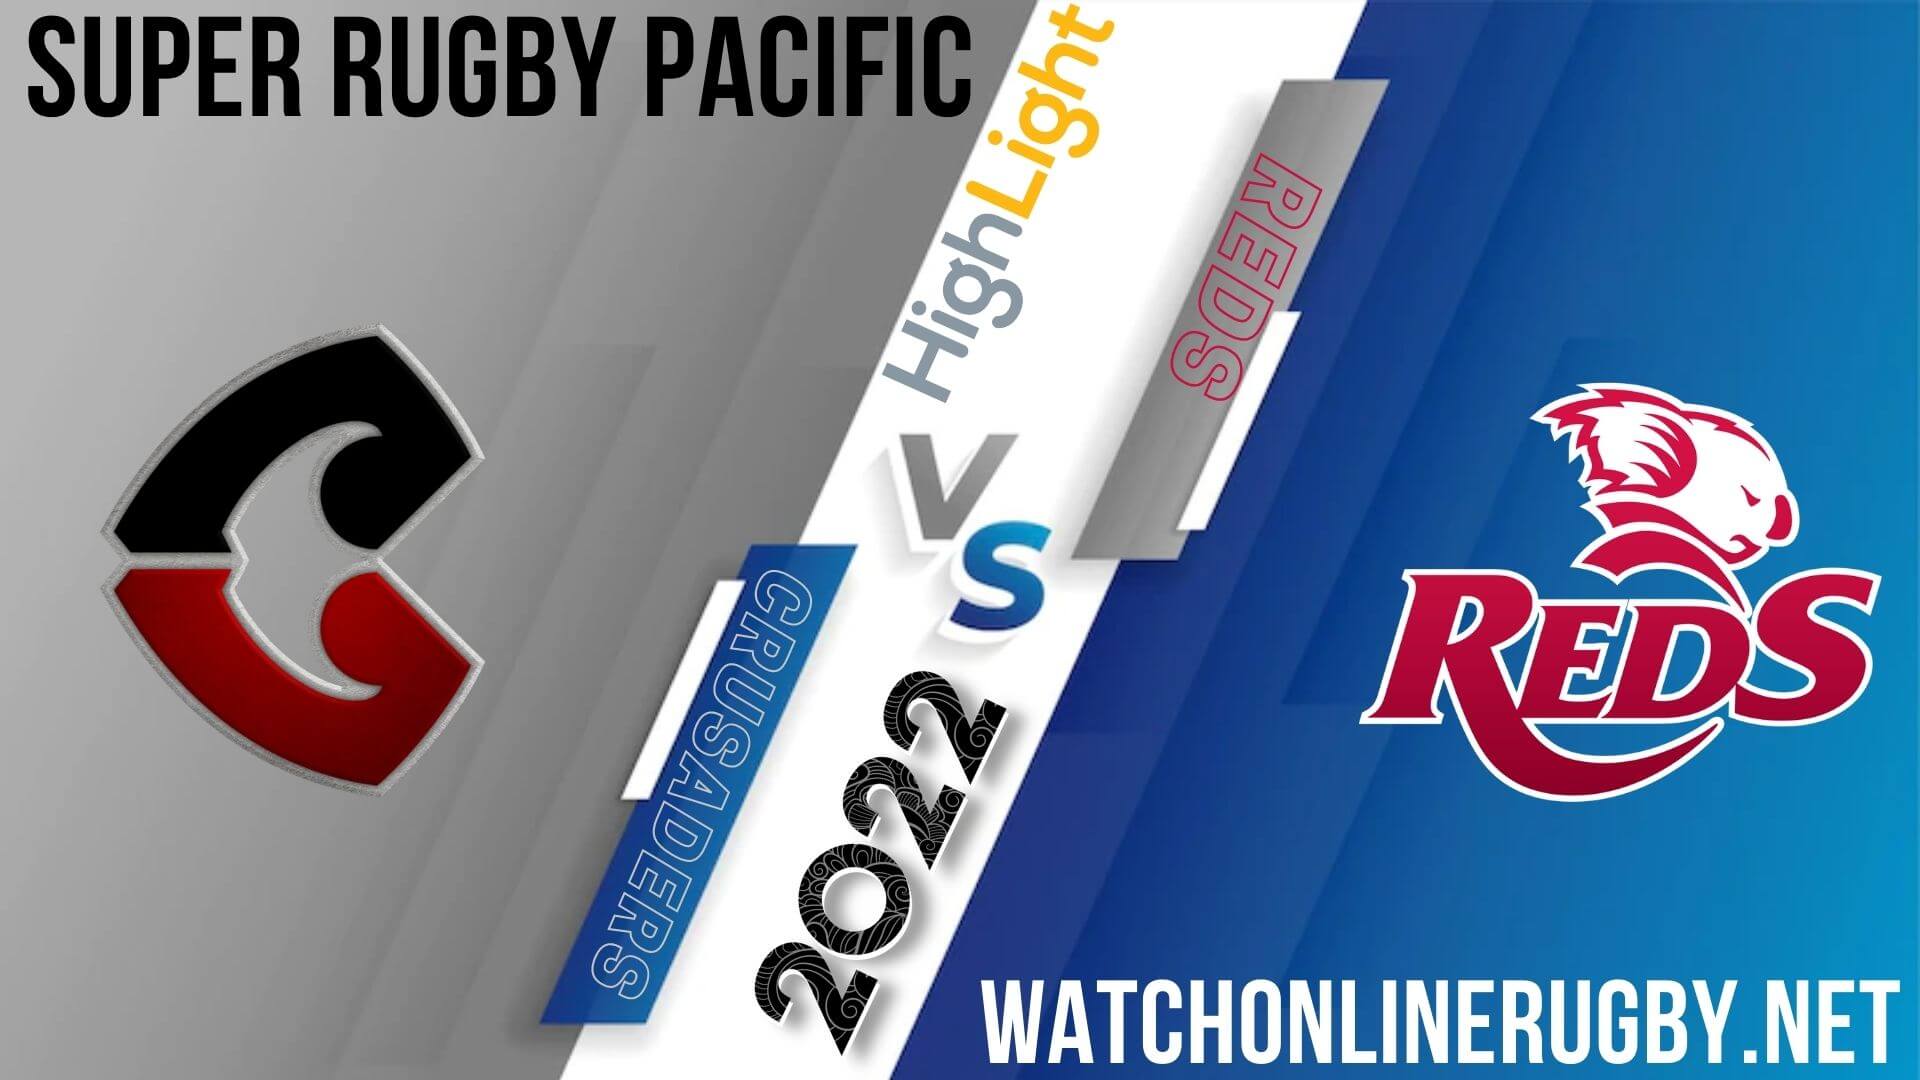 Crusaders Vs Reds Super Rugby Pacific 2022 Quarter-Final